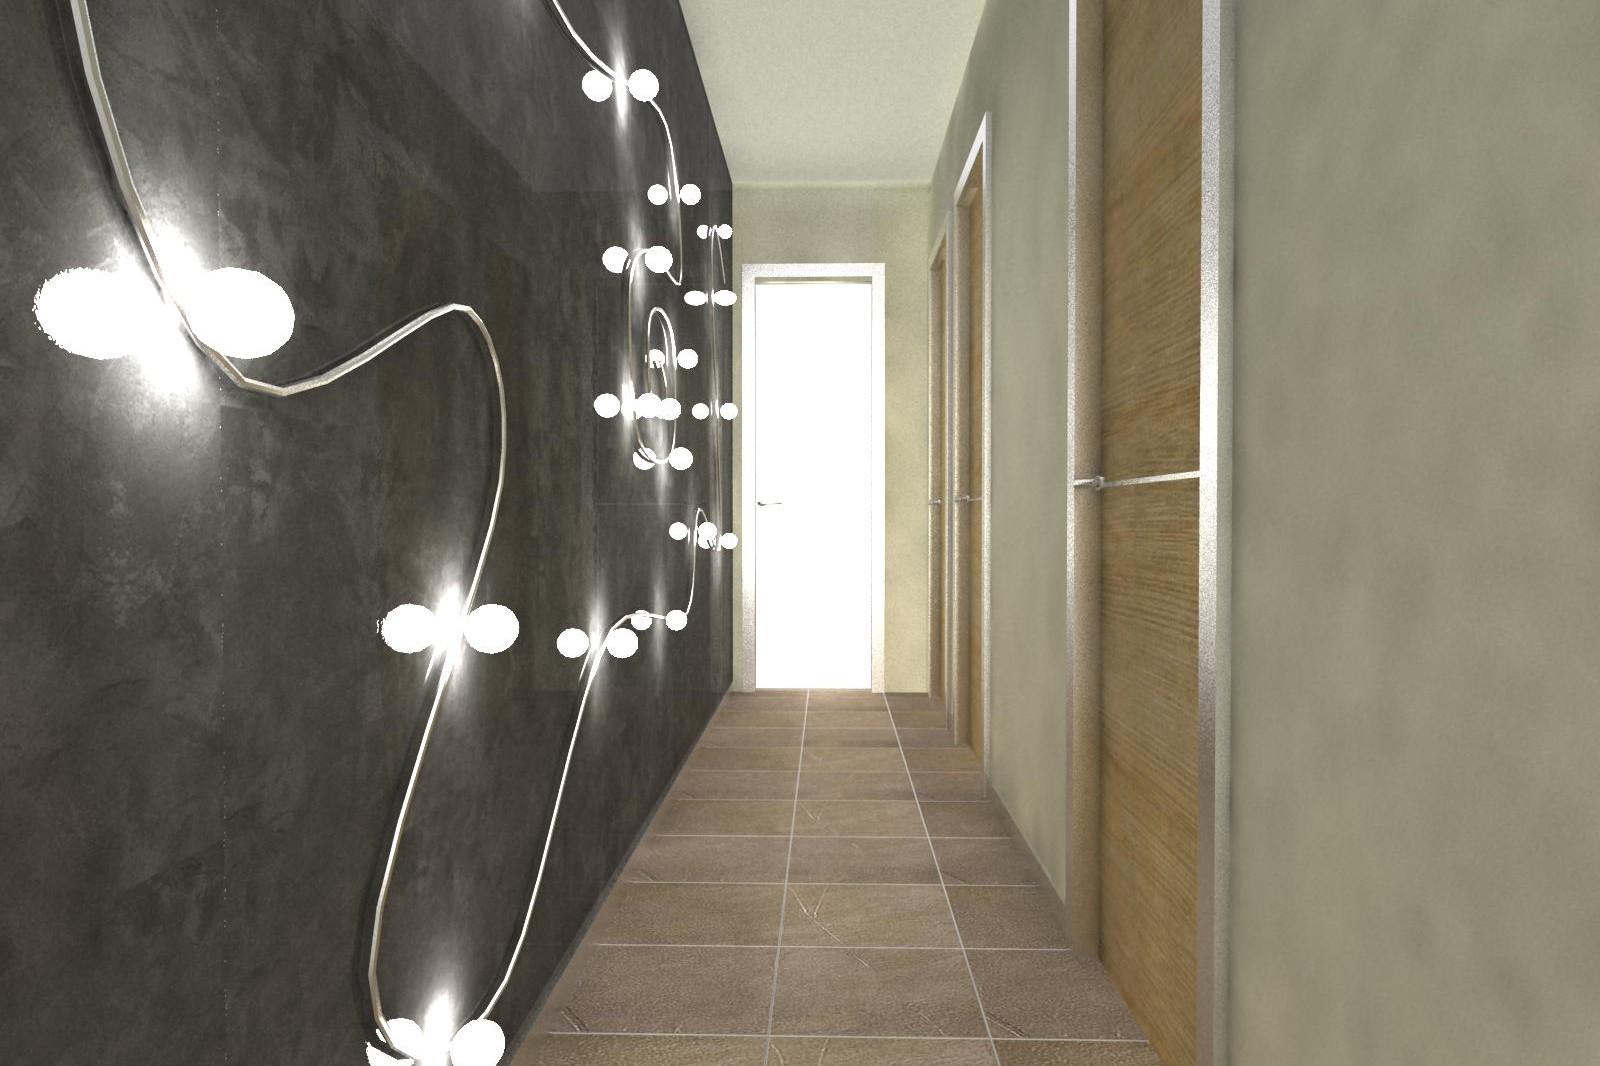 An image of a hallway with bright hanging lights.